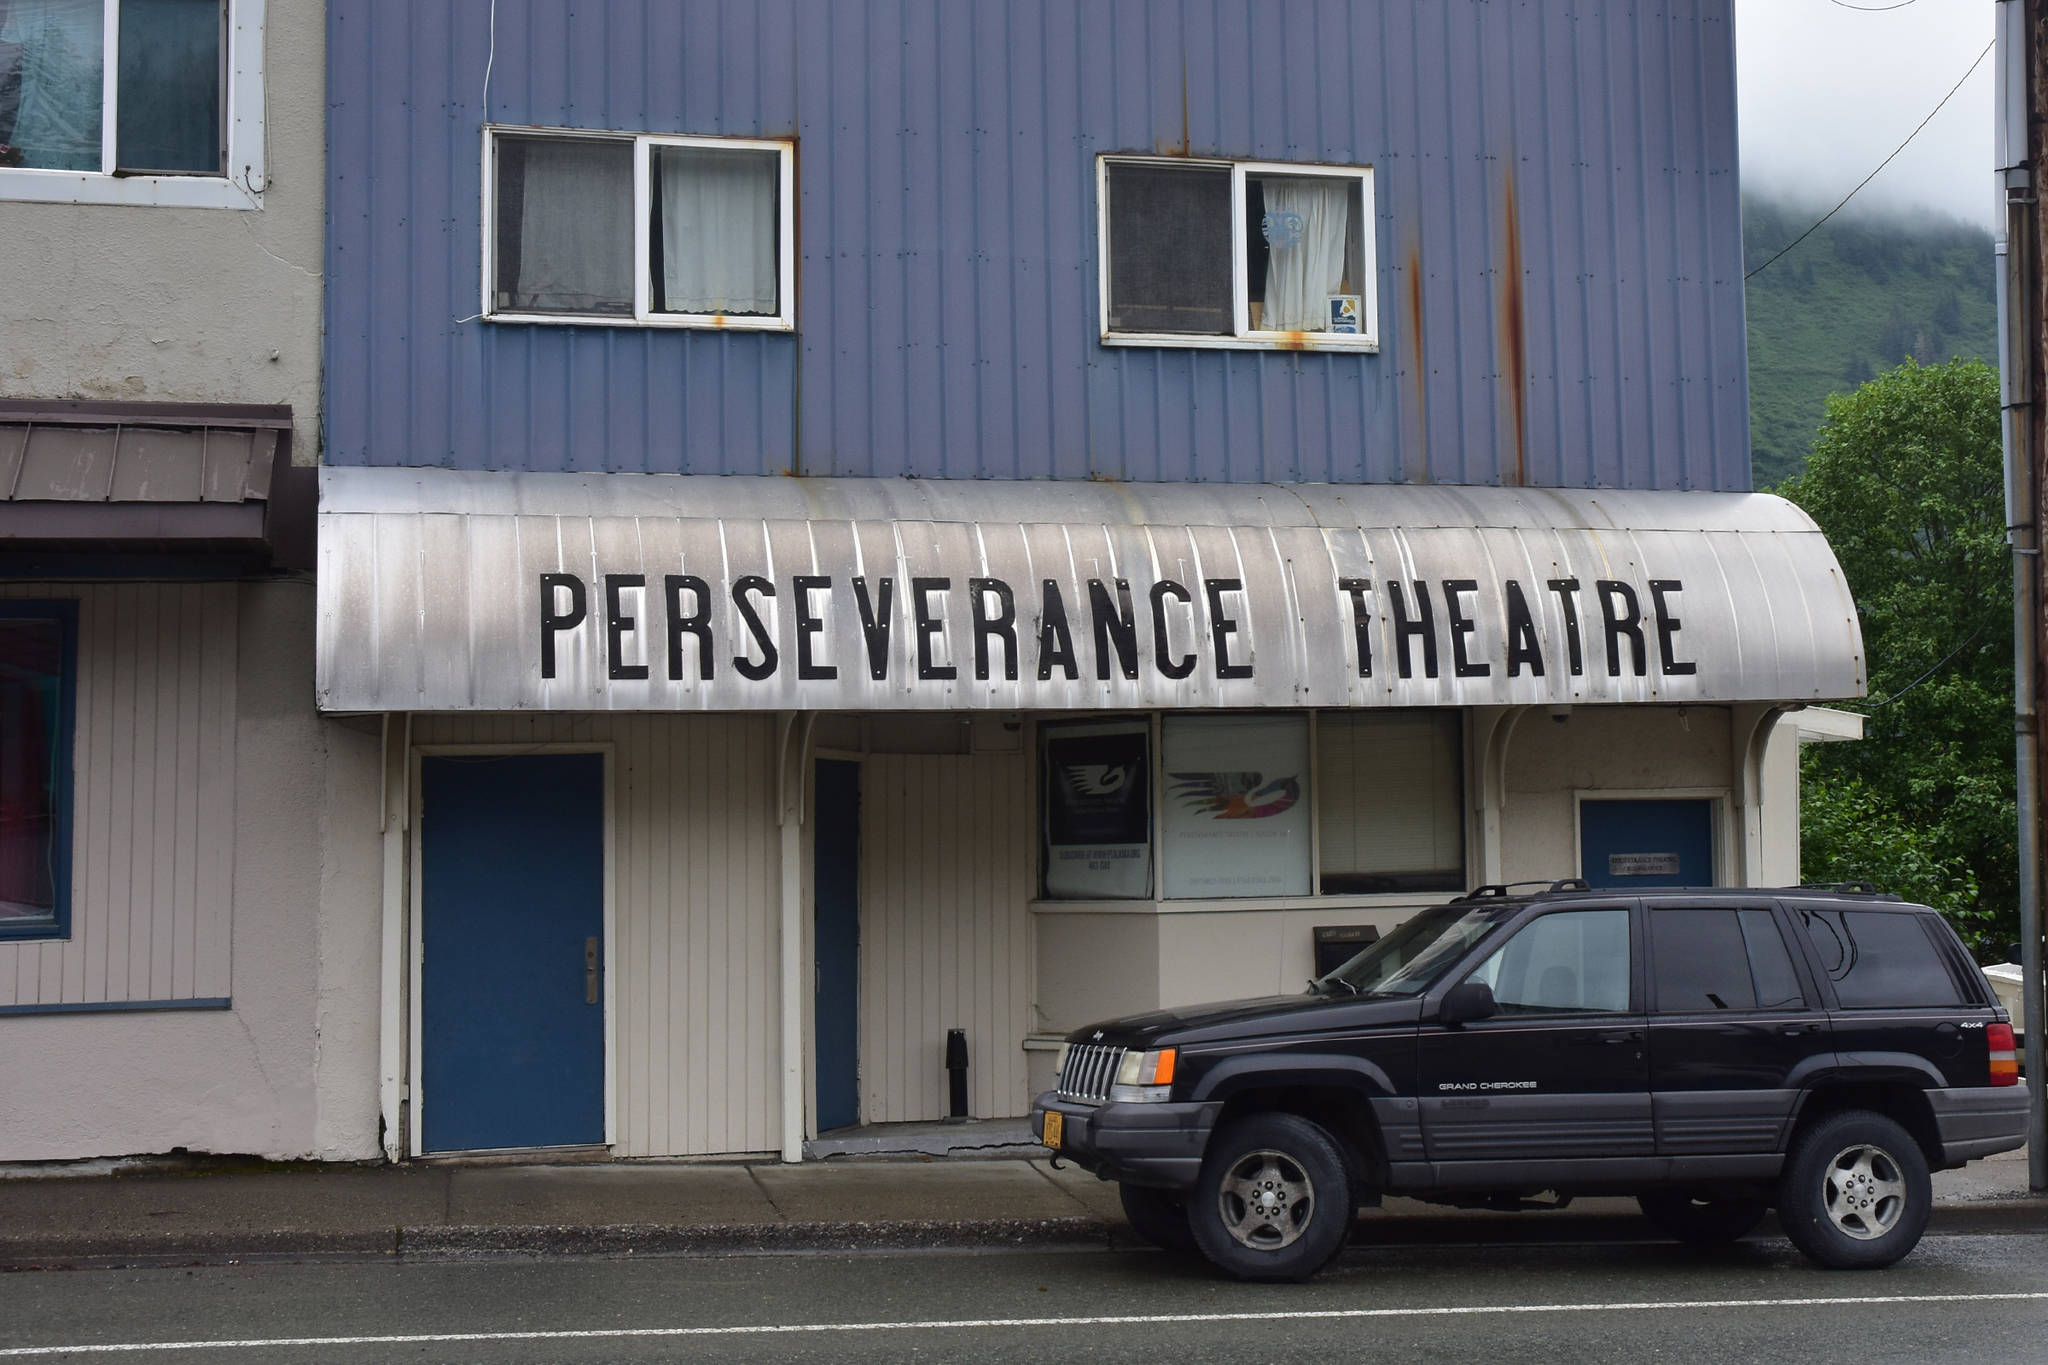 New takes on annual programs and brand new projects are in Perseverance Theatre’s future, said the theater’s artistic director Leslie Ishii in a video interview. (Peter Segall | Juneau Epire)